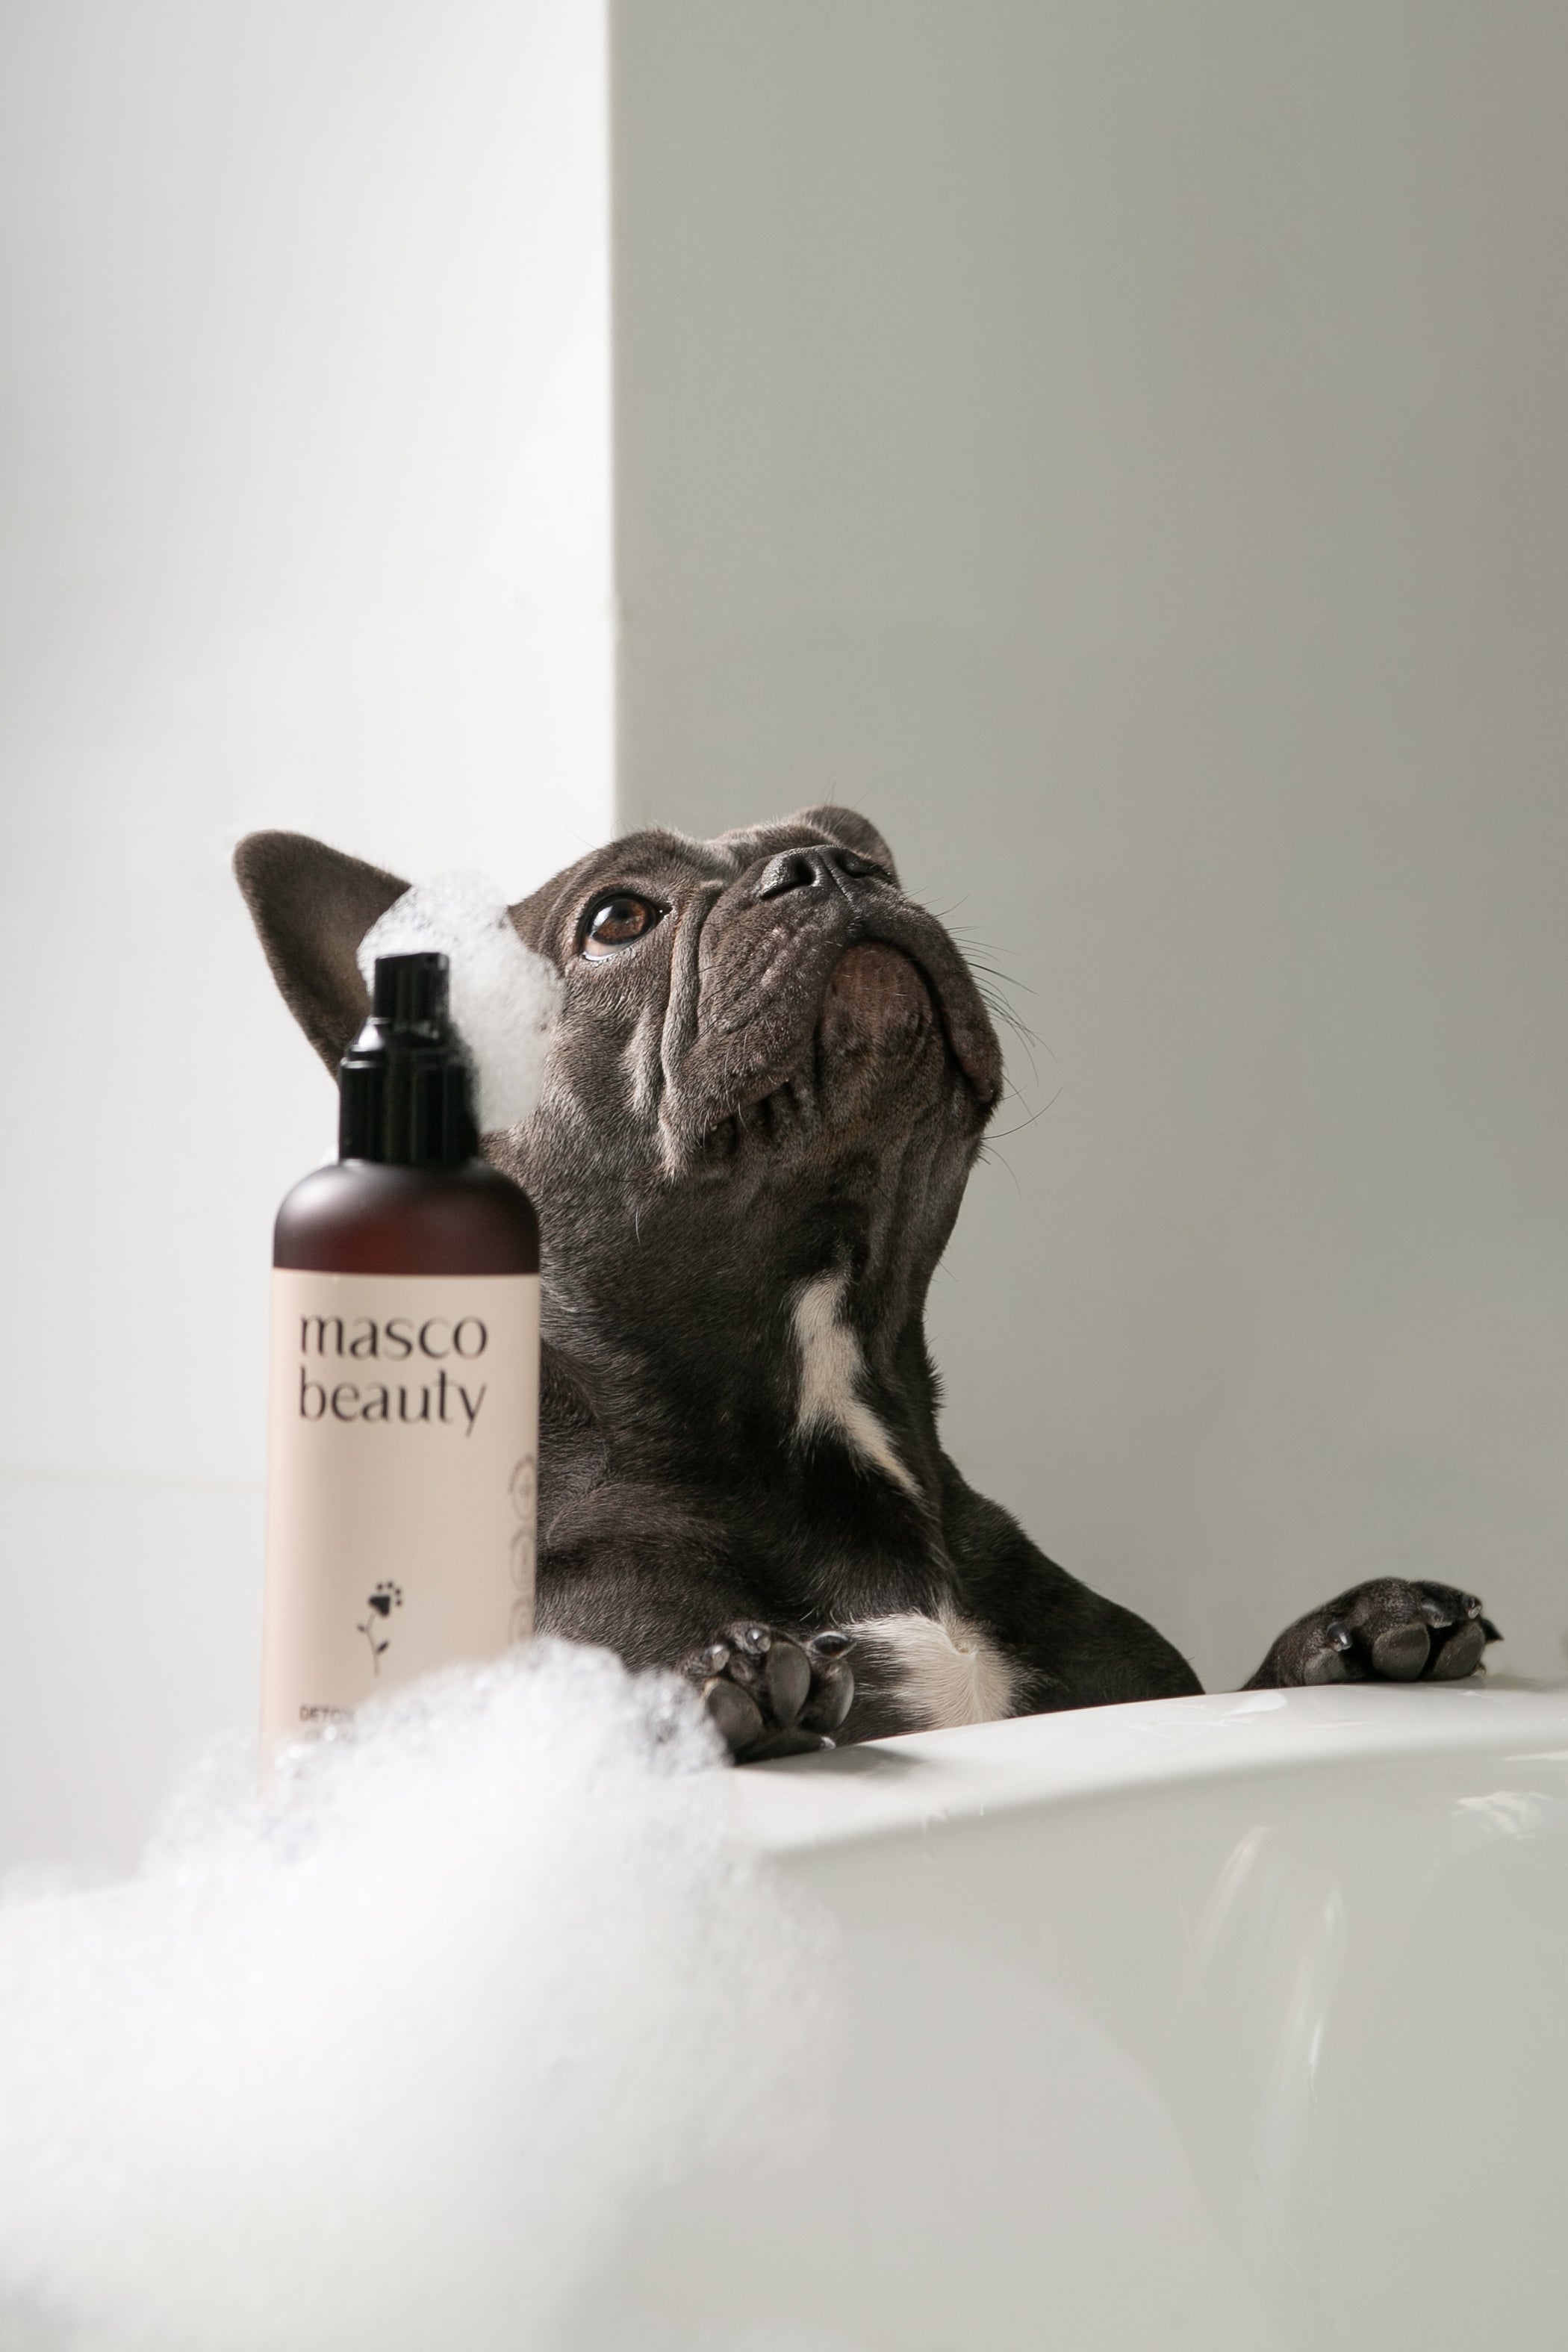 Furmey introduces Masco beauty: The beauty and spa routine your pet deserves